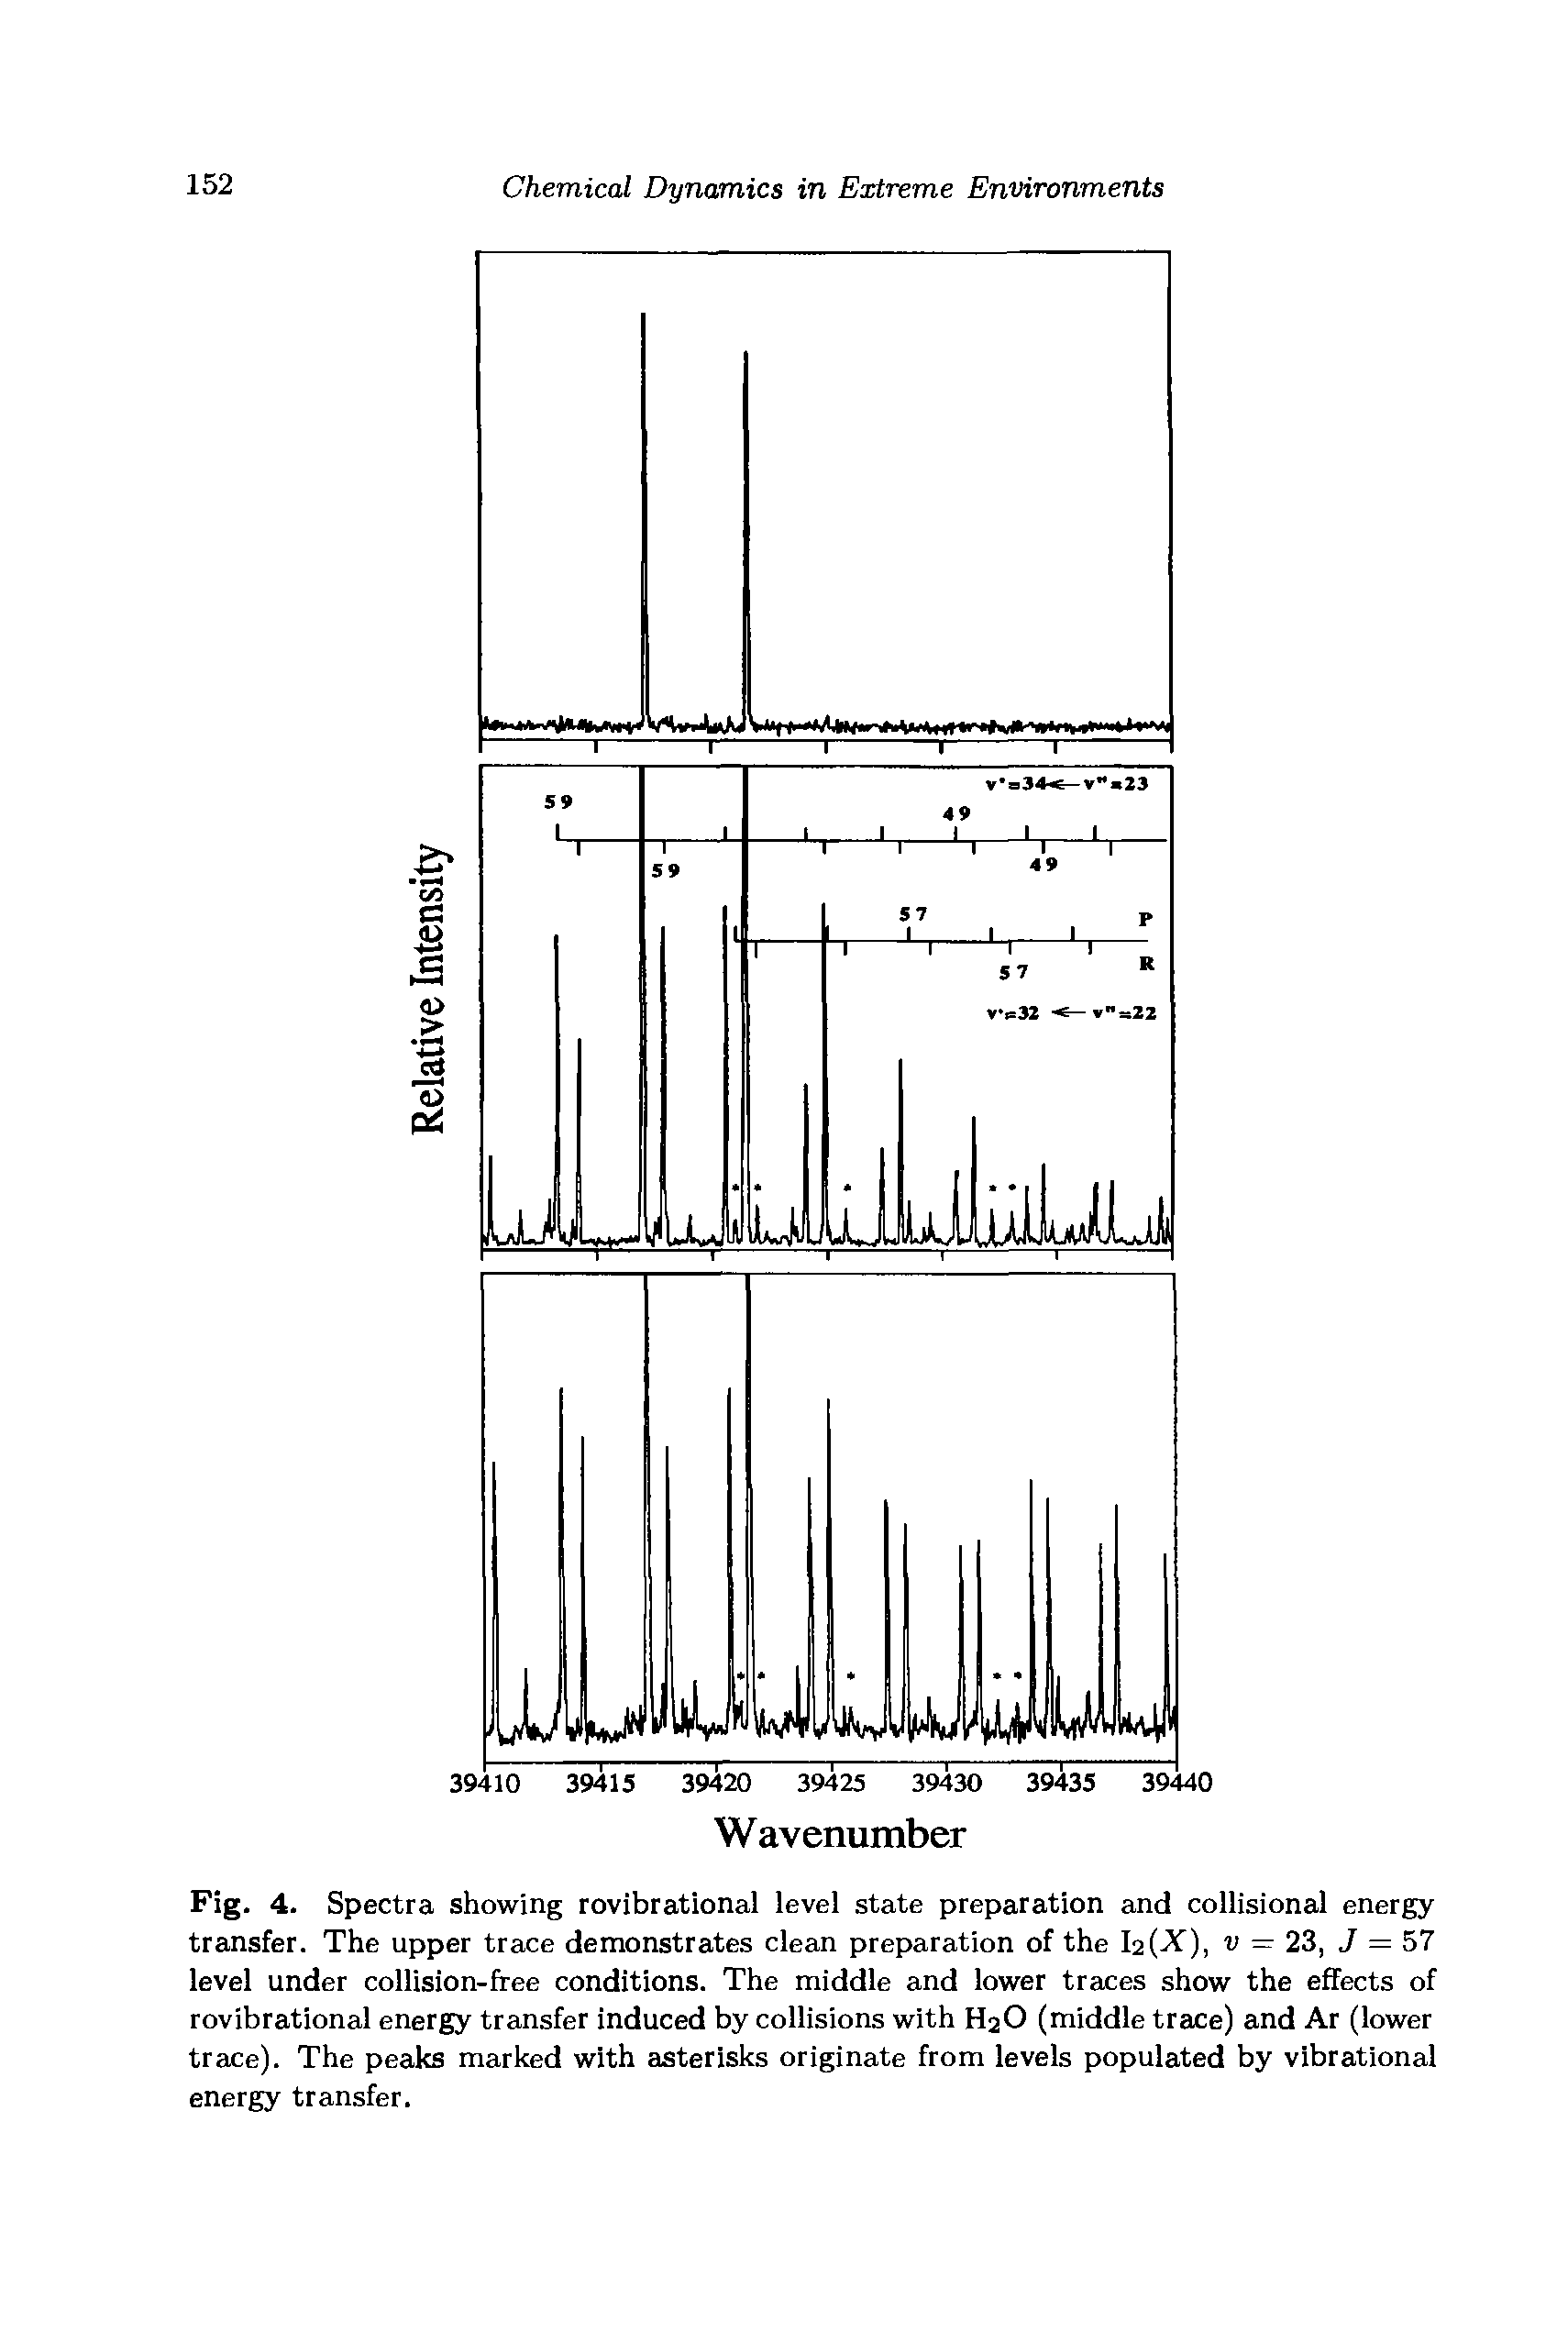 Fig. 4. Spectra showing rovibrational level state preparation and collisional energy transfer. The upper trace demonstrates clean preparation of the l2(.X ), v = 23, J = 57 level under collision-free conditions. The middle and lower traces show the effects of rovibrational energy transfer induced by collisions with H2O (middle trace) and Ar (lower trace). The peaks marked with asterisks originate from levels populated by vibrational energy transfer.